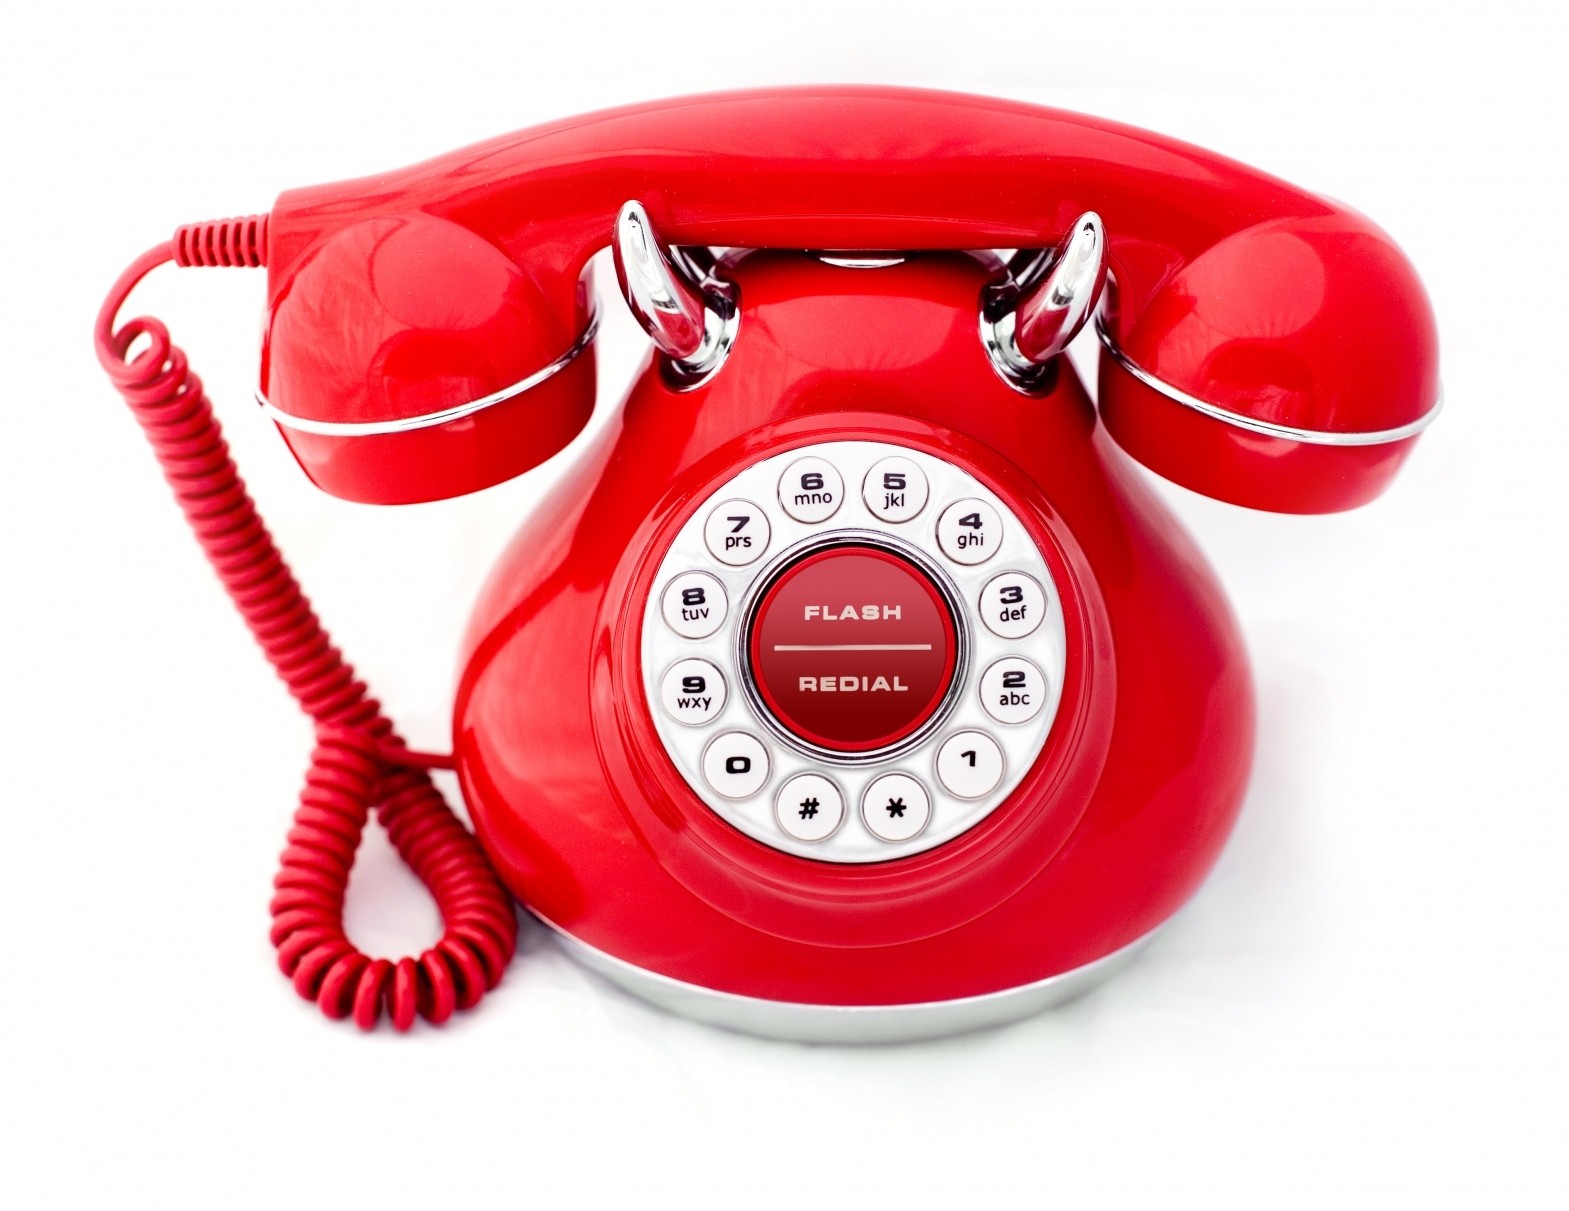 red beautiful Phone, photo, download free, without payment